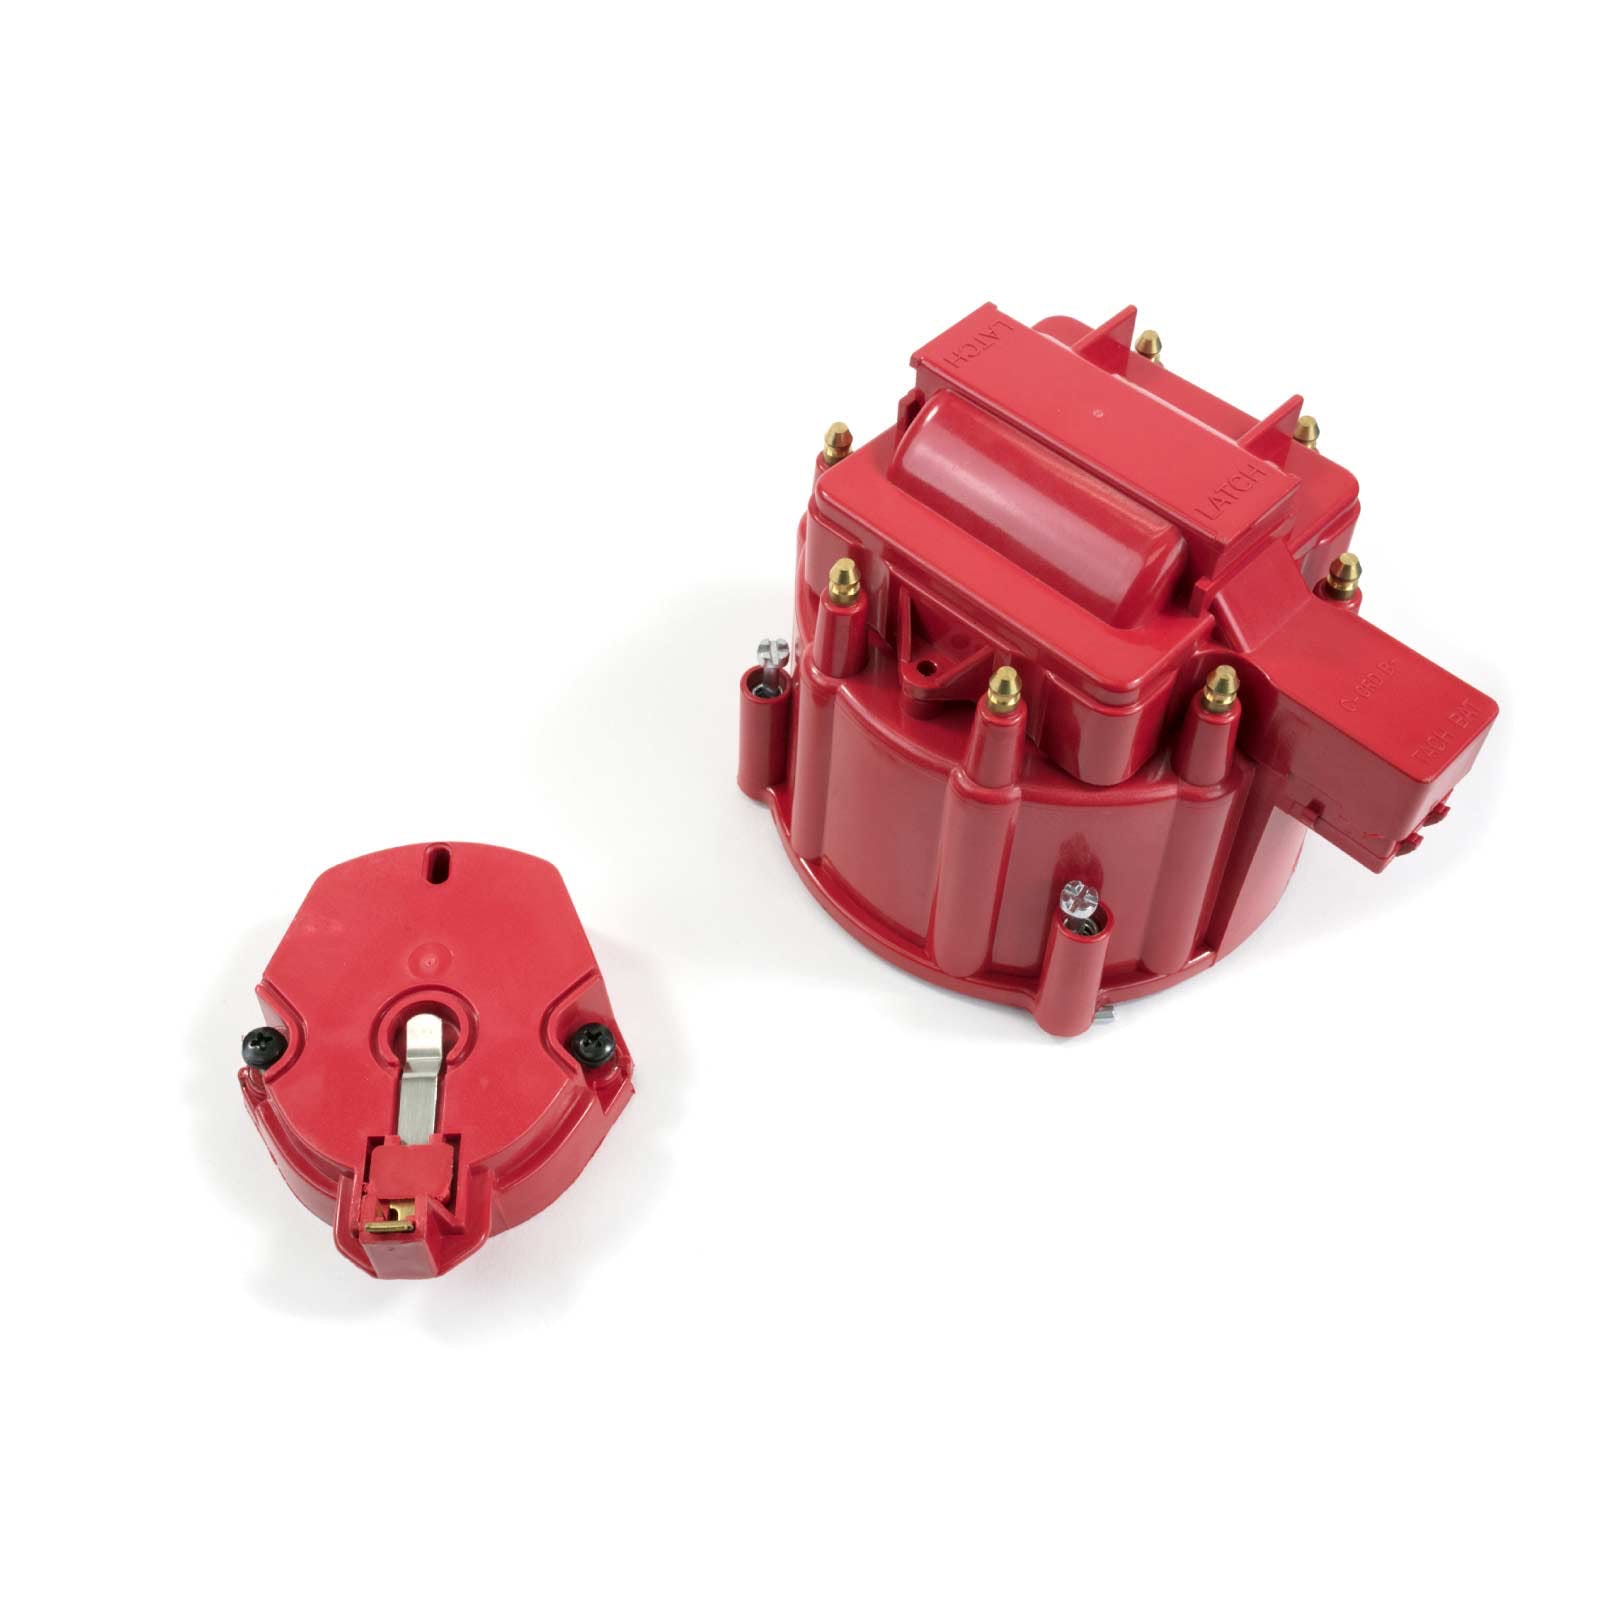 Top Street Performance JM6951R HEI Distributor Cap and Rotor Kit Oem Cap, Coil Cover, Rotor, Red